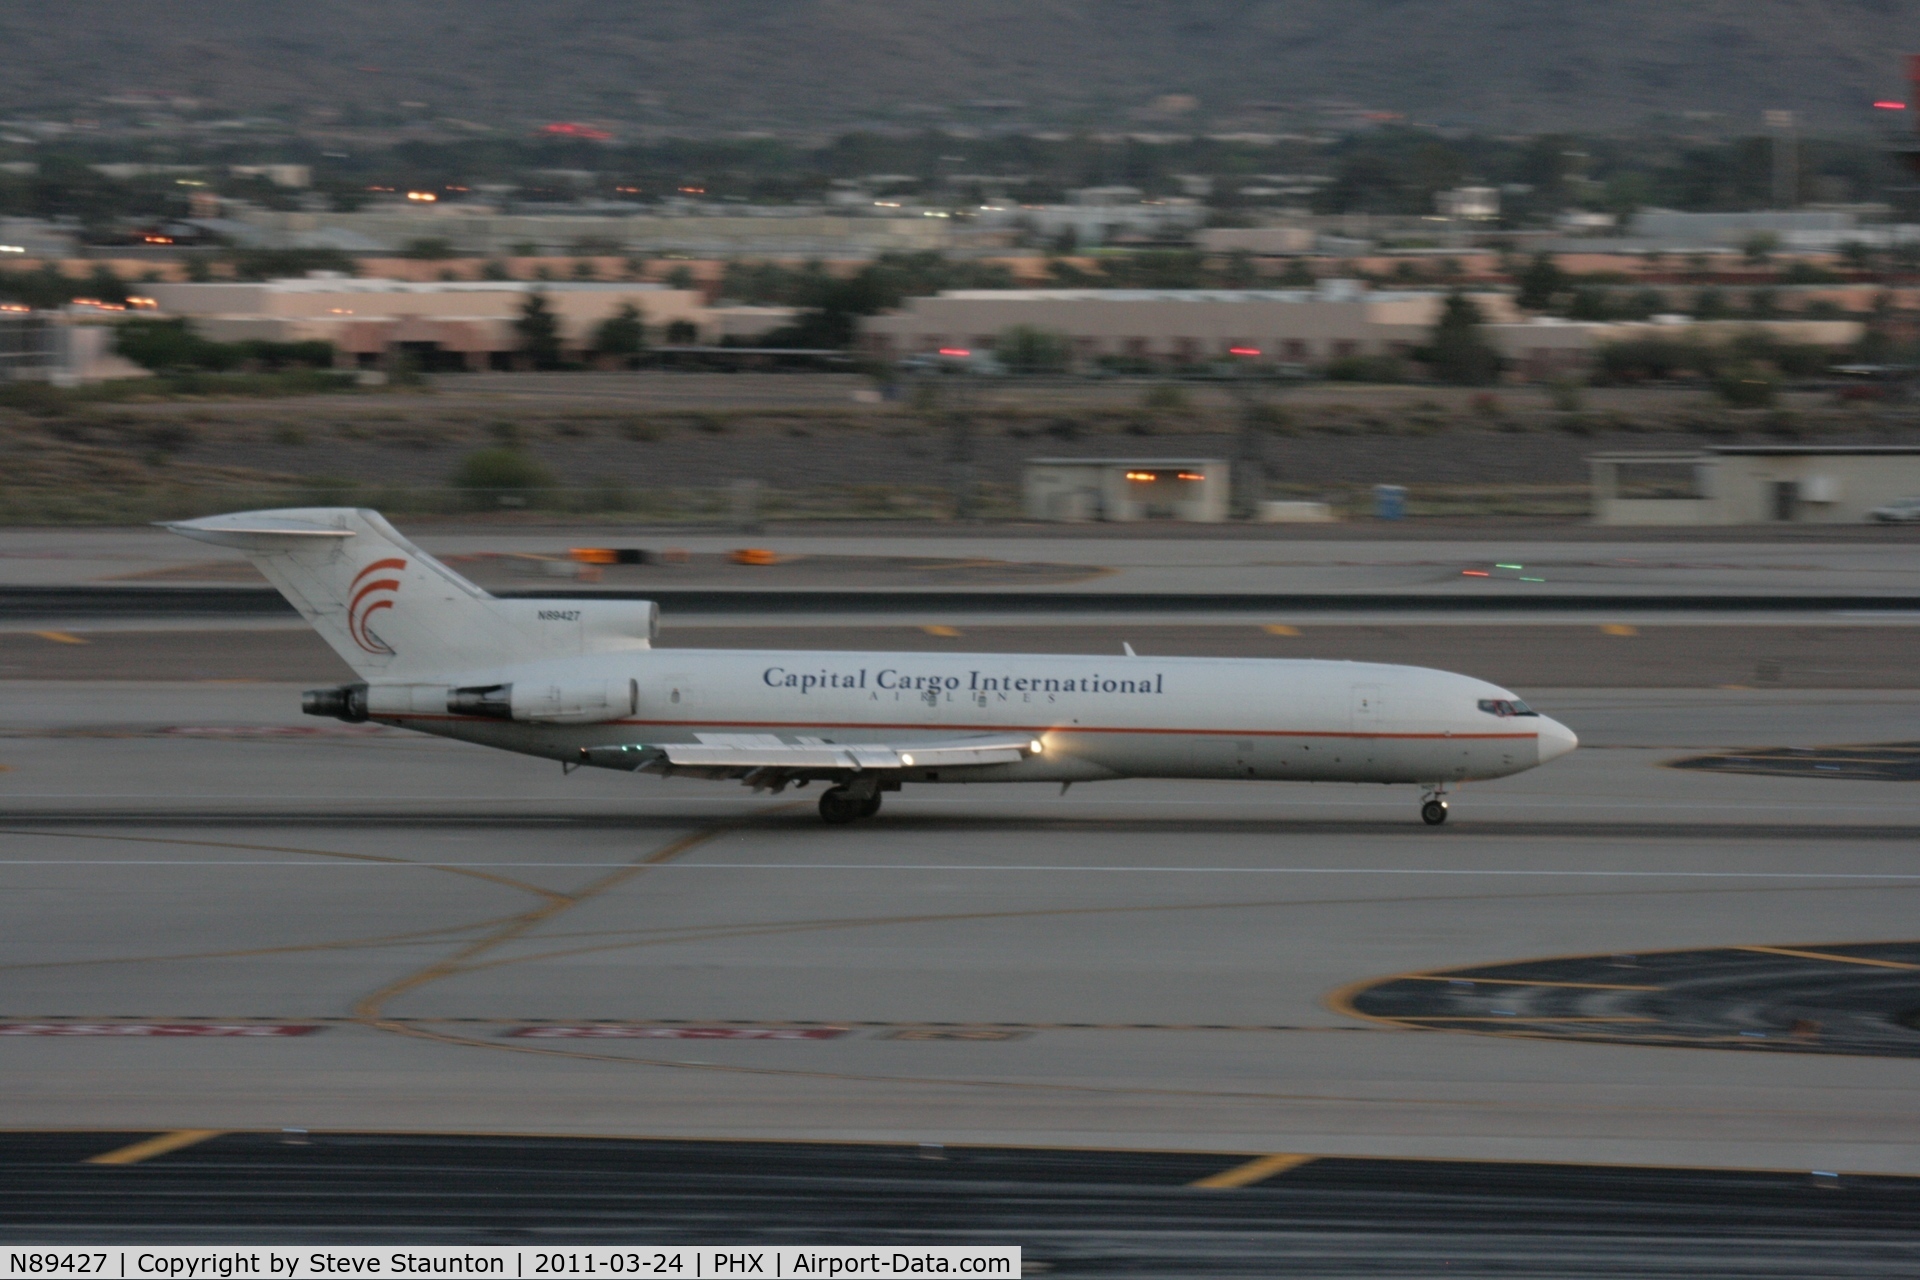 N89427, 1977 Boeing 727-227 C/N 21365, Taken at Phoenix Sky Harbor Airport, in March 2011 whilst on an Aeroprint Aviation tour (in the failing light - but what a rare sight)